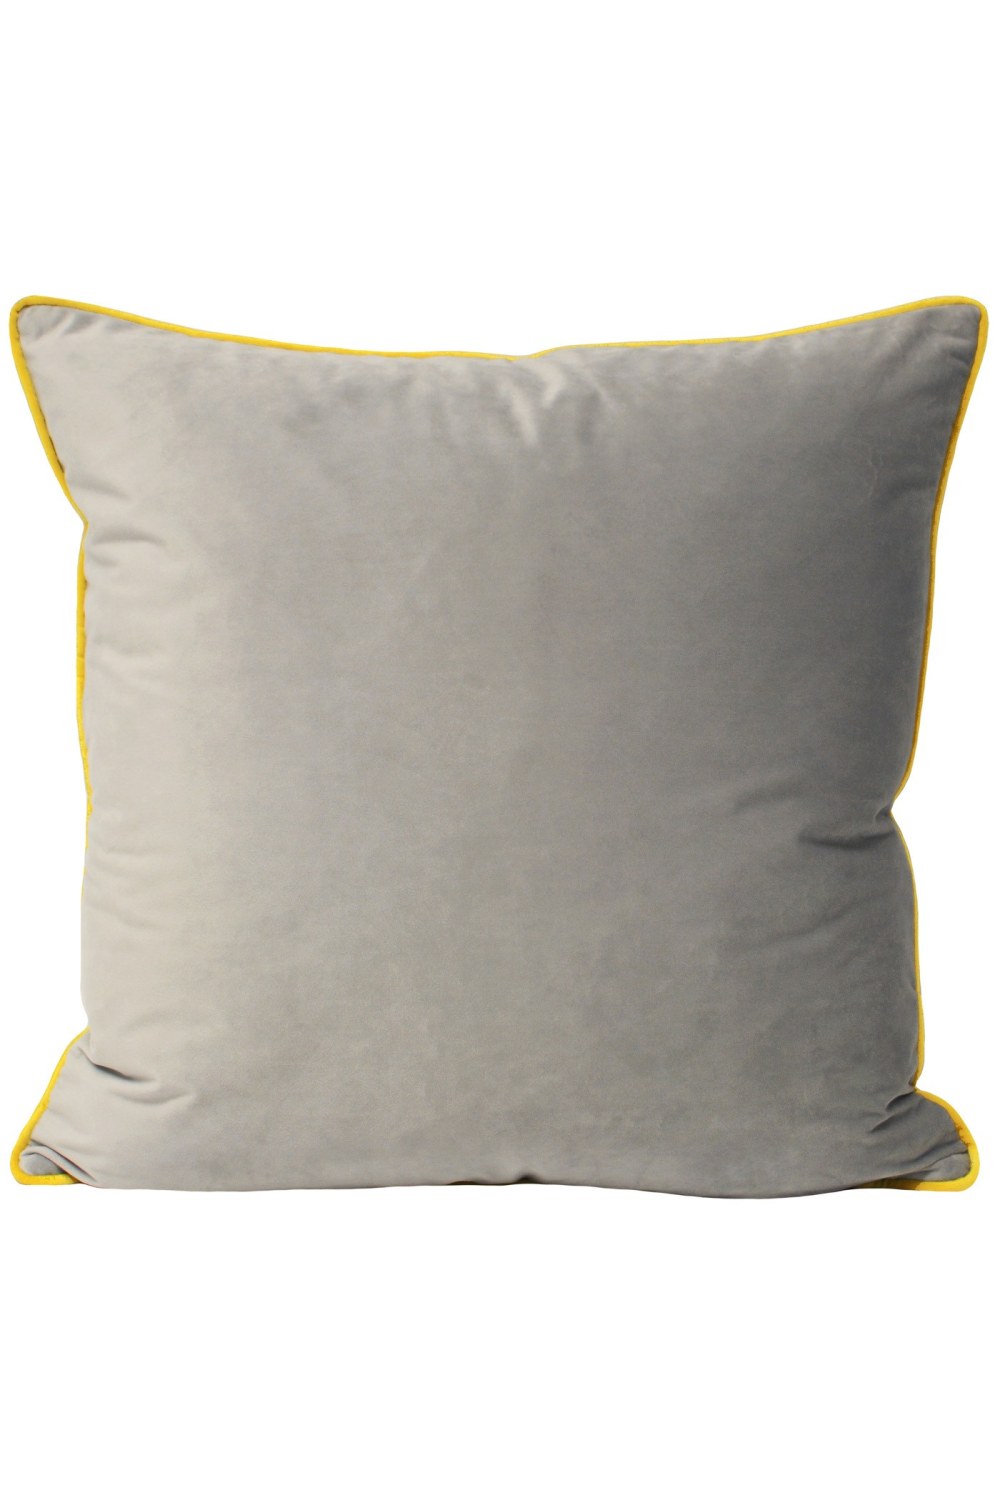 Riva Home Meridian Cushion Cover (Dove/Cylon) (22x22in)